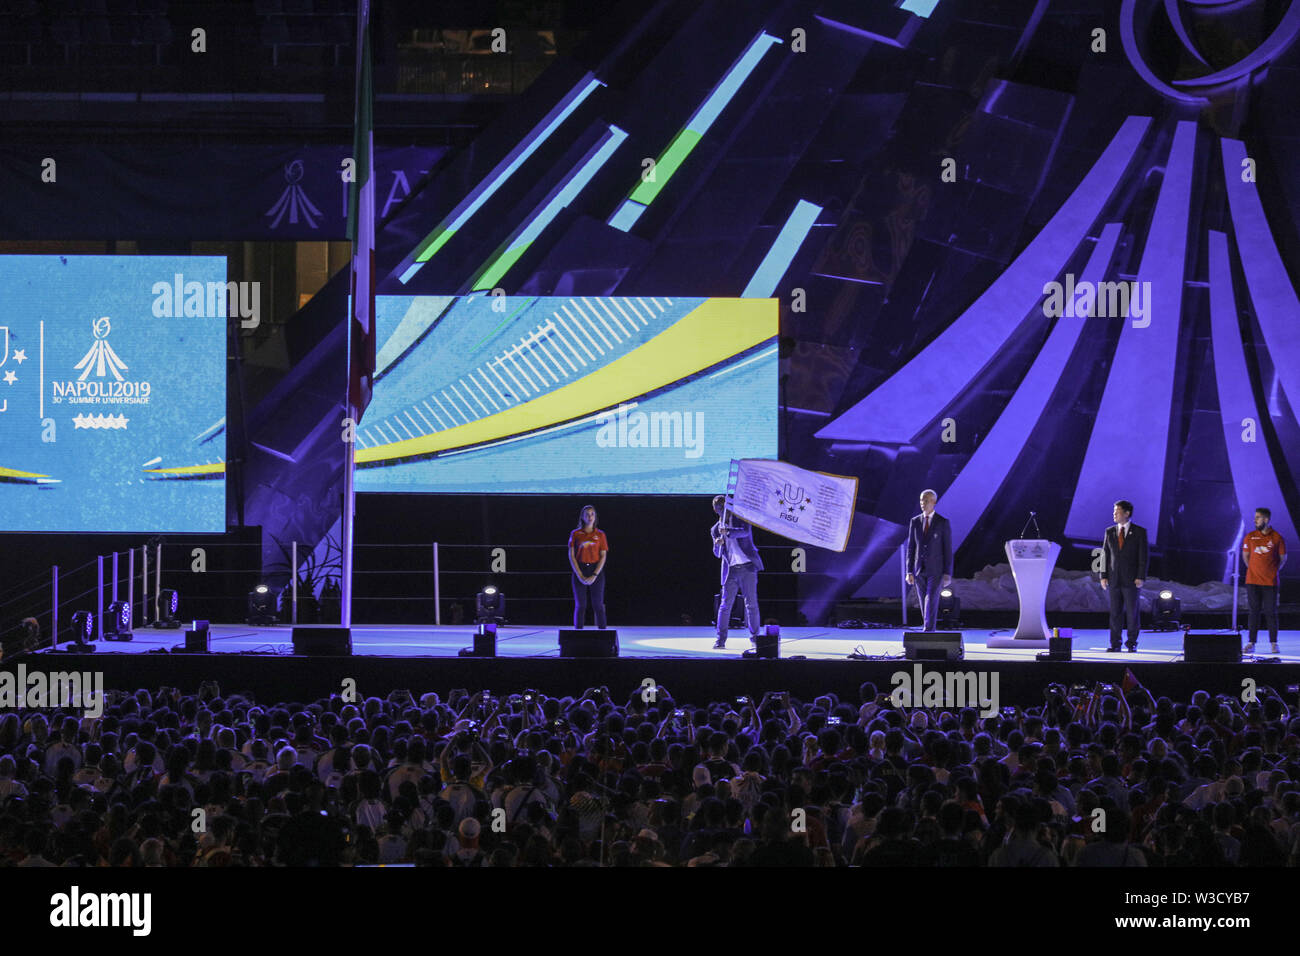 Naples, campania. 14th July, 2019. Italy, July 14, 2019 at the San Paolo stadium in Naples had the closing ceremony for the games open to university students. Credit: Fabio Sasso/ZUMA Wire/Alamy Live News Stock Photo